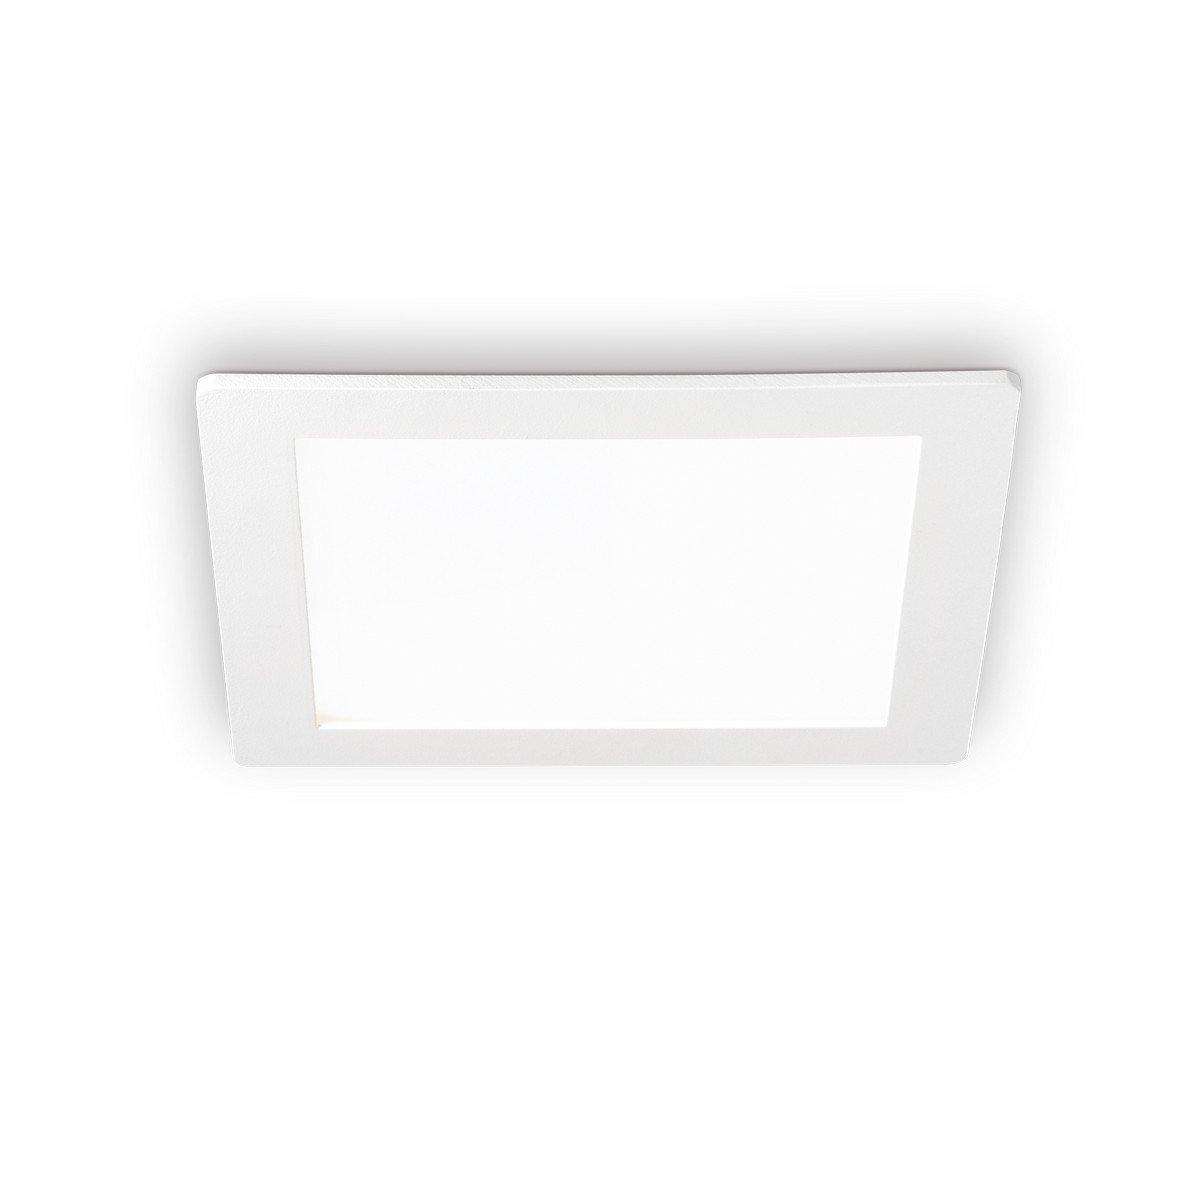 Groove LED 1 Light Small Square Warm Recessed Spotlight Panel White